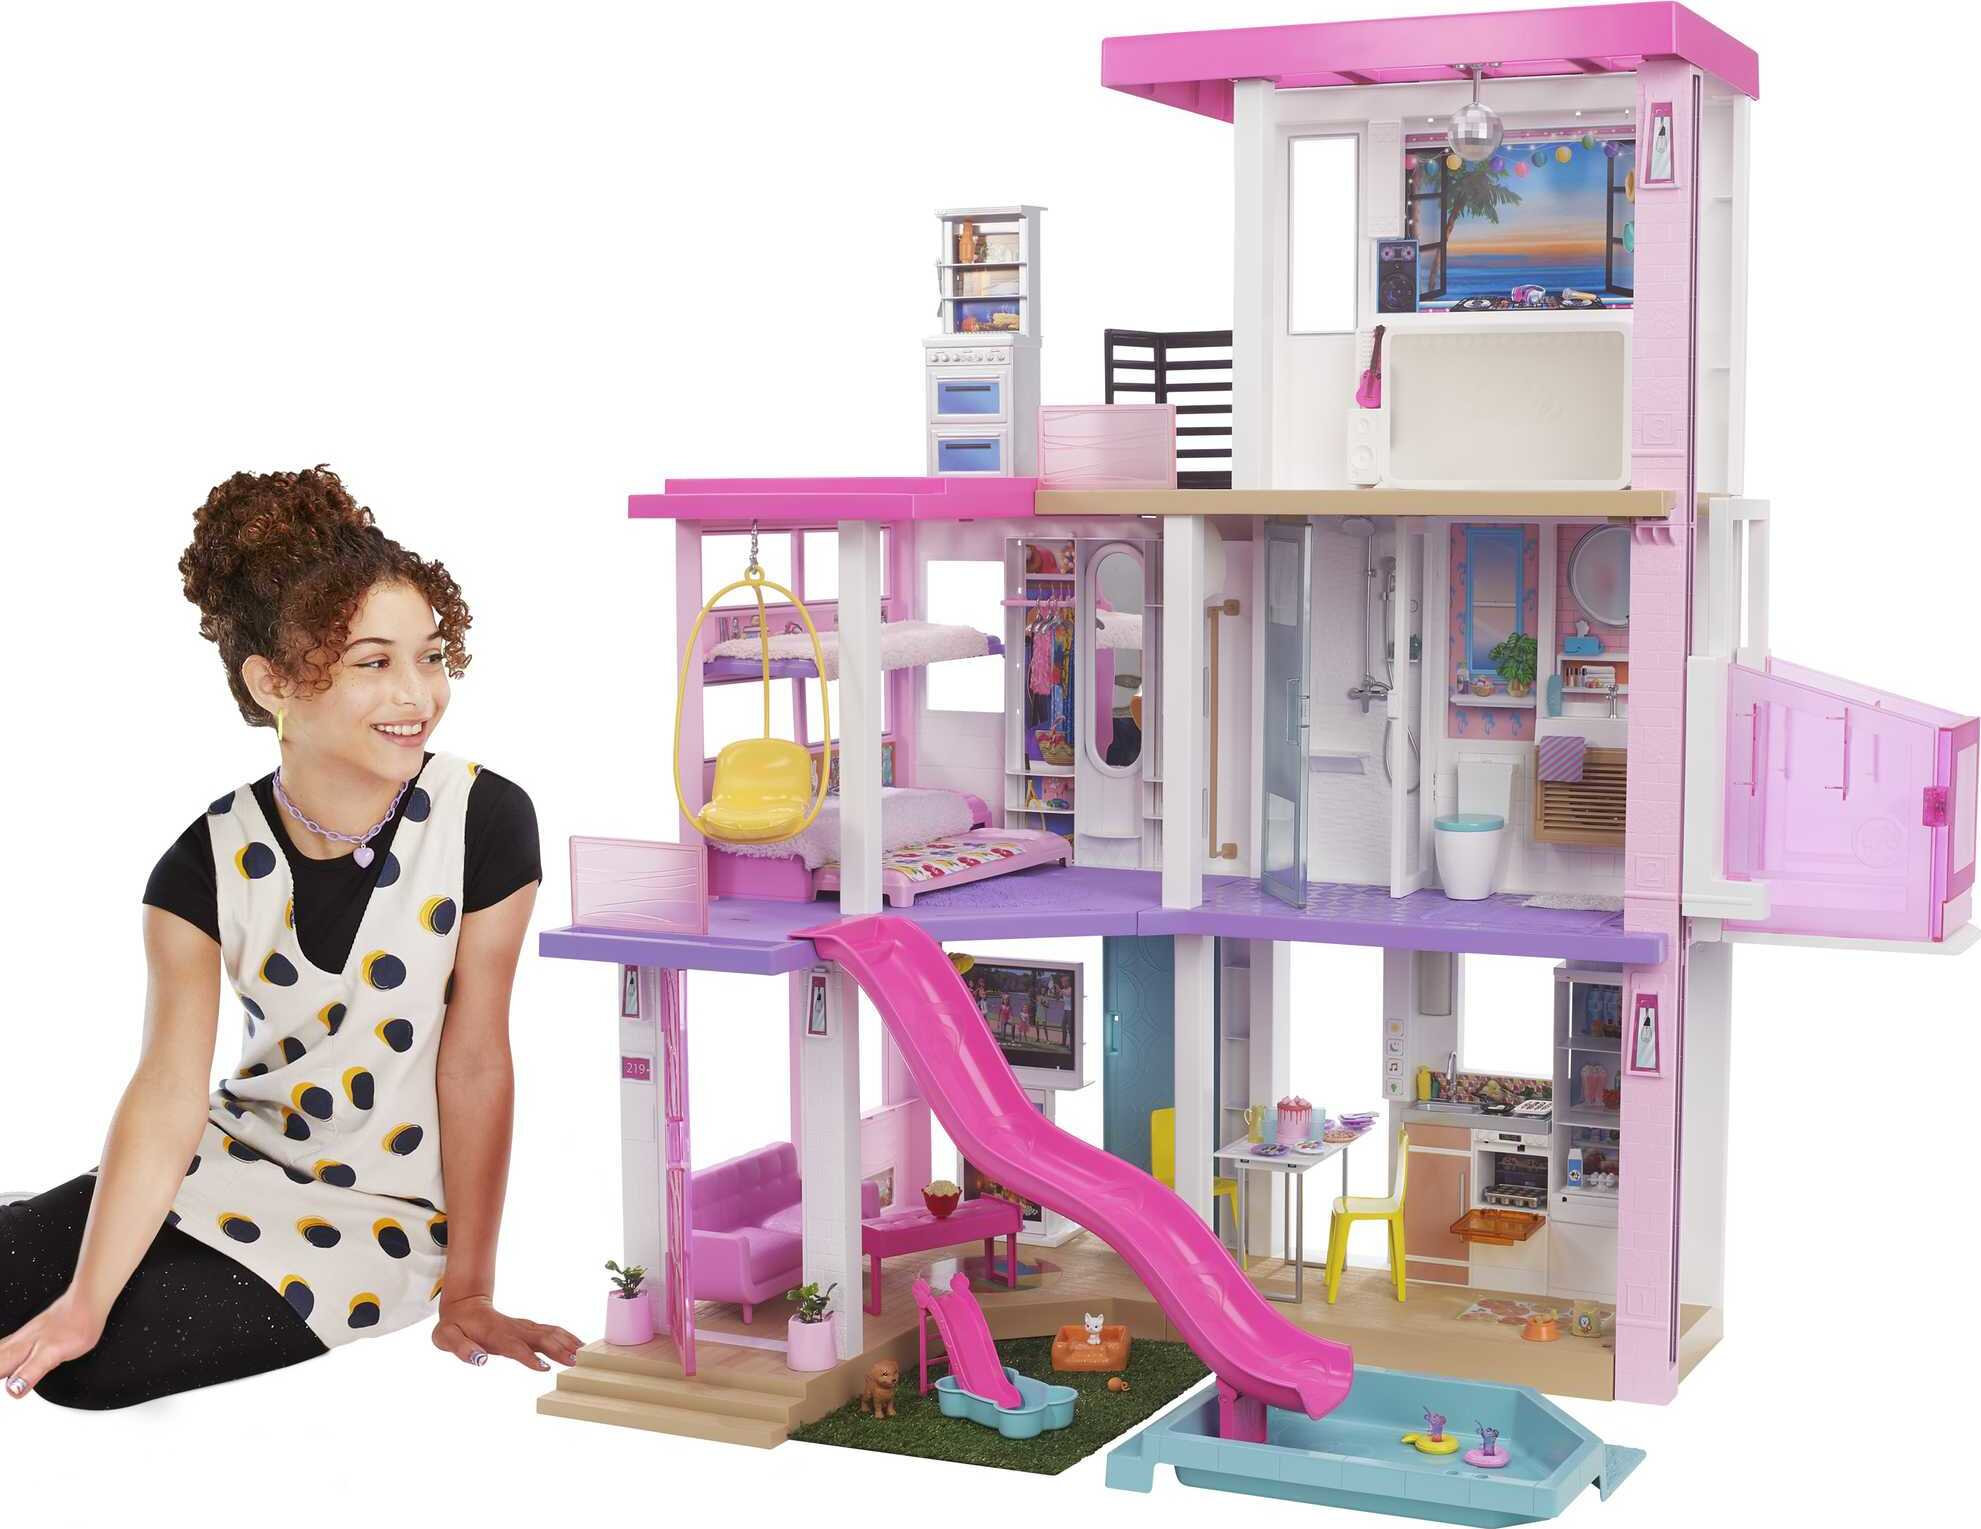 Barbie DreamHouse Playset with 10 Play Areas, 75+ Furniture & Accessories, Lights & Sounds - image 1 of 8